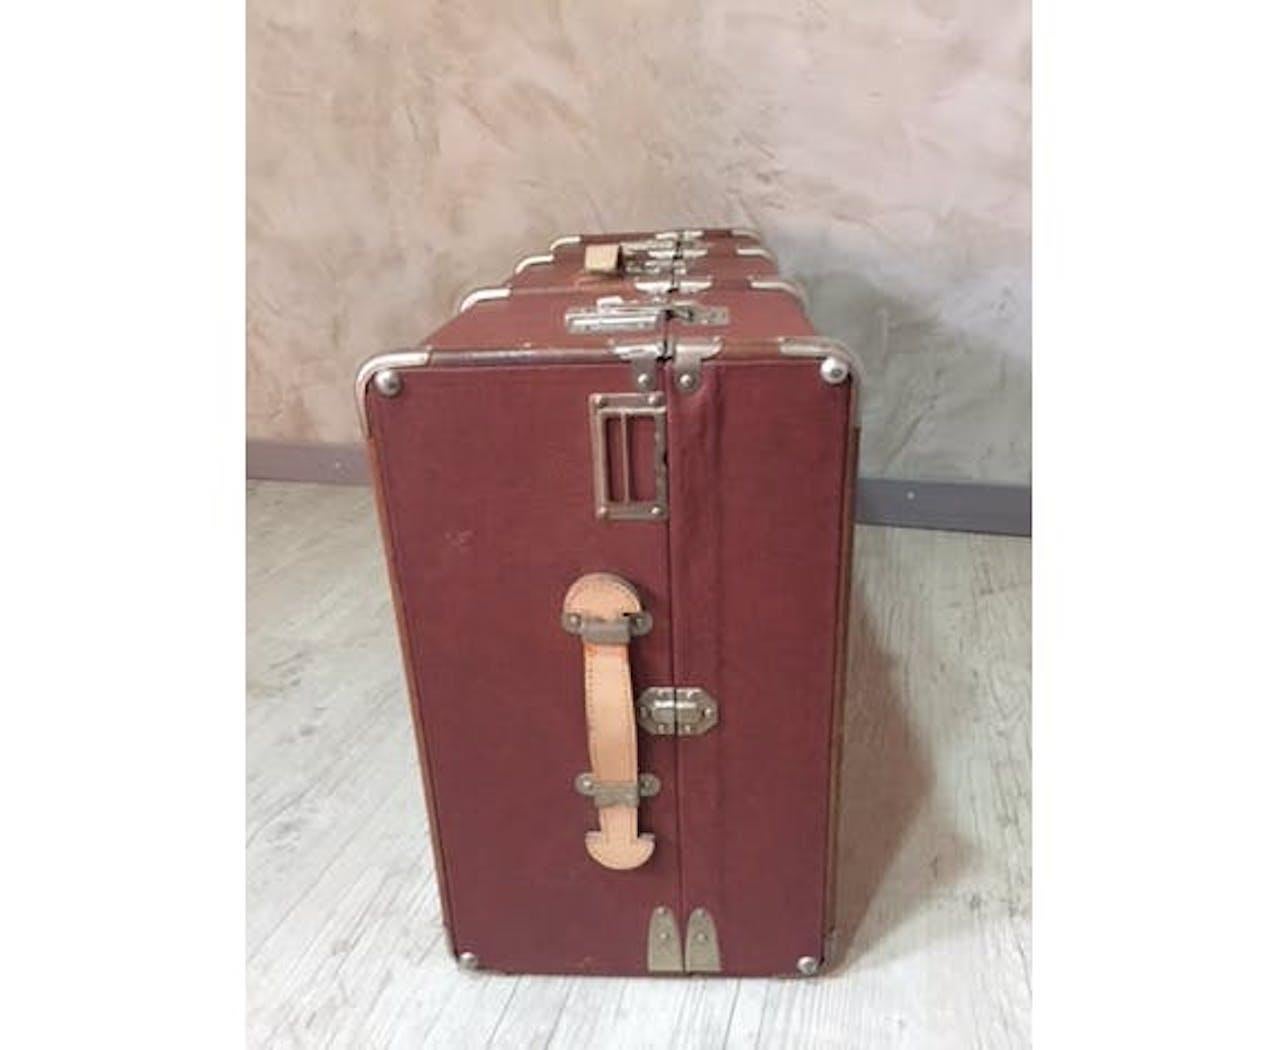 Very nice 20th century French traveling trunk. Leather handles. Chromed metal parts.
Wall convering on the inside.